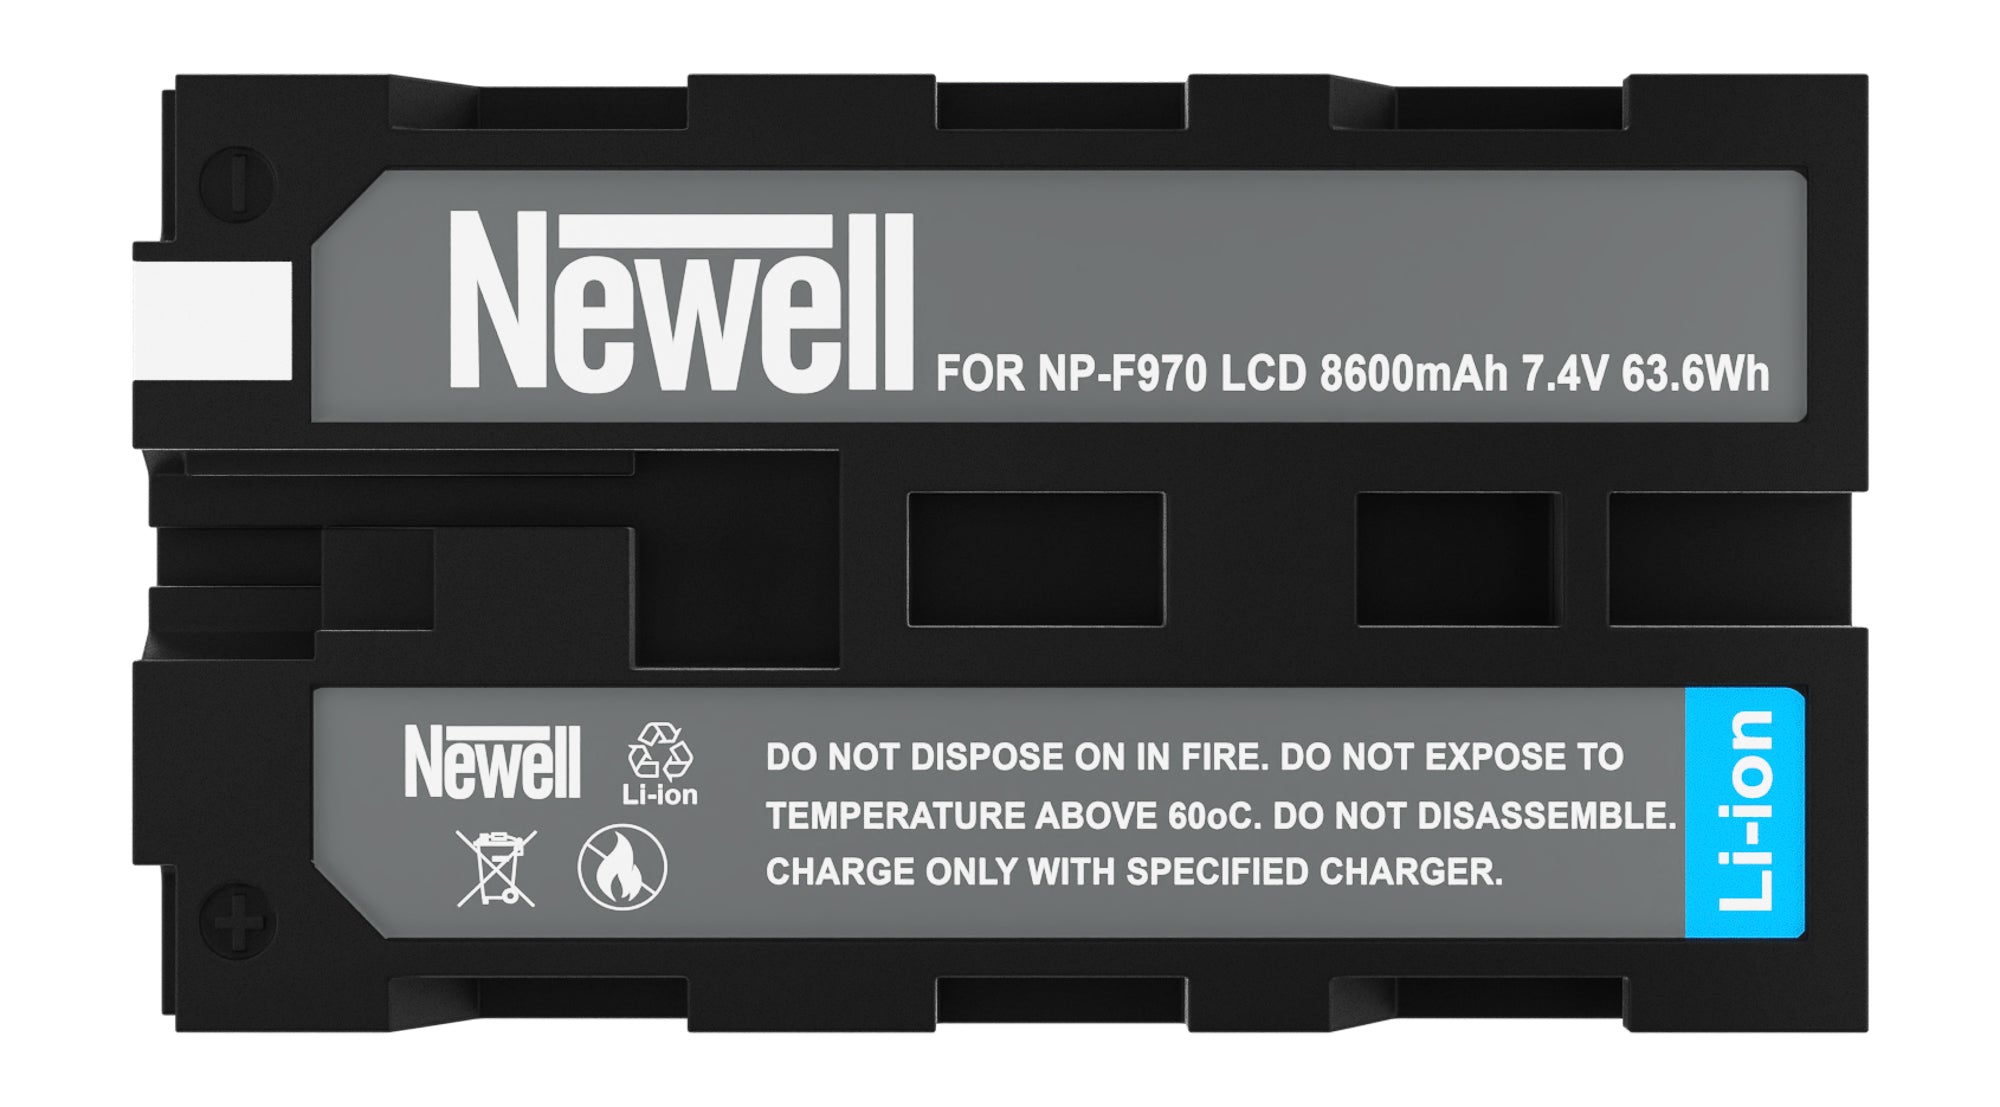 Newell rechargeable battery NP-F970 LCD